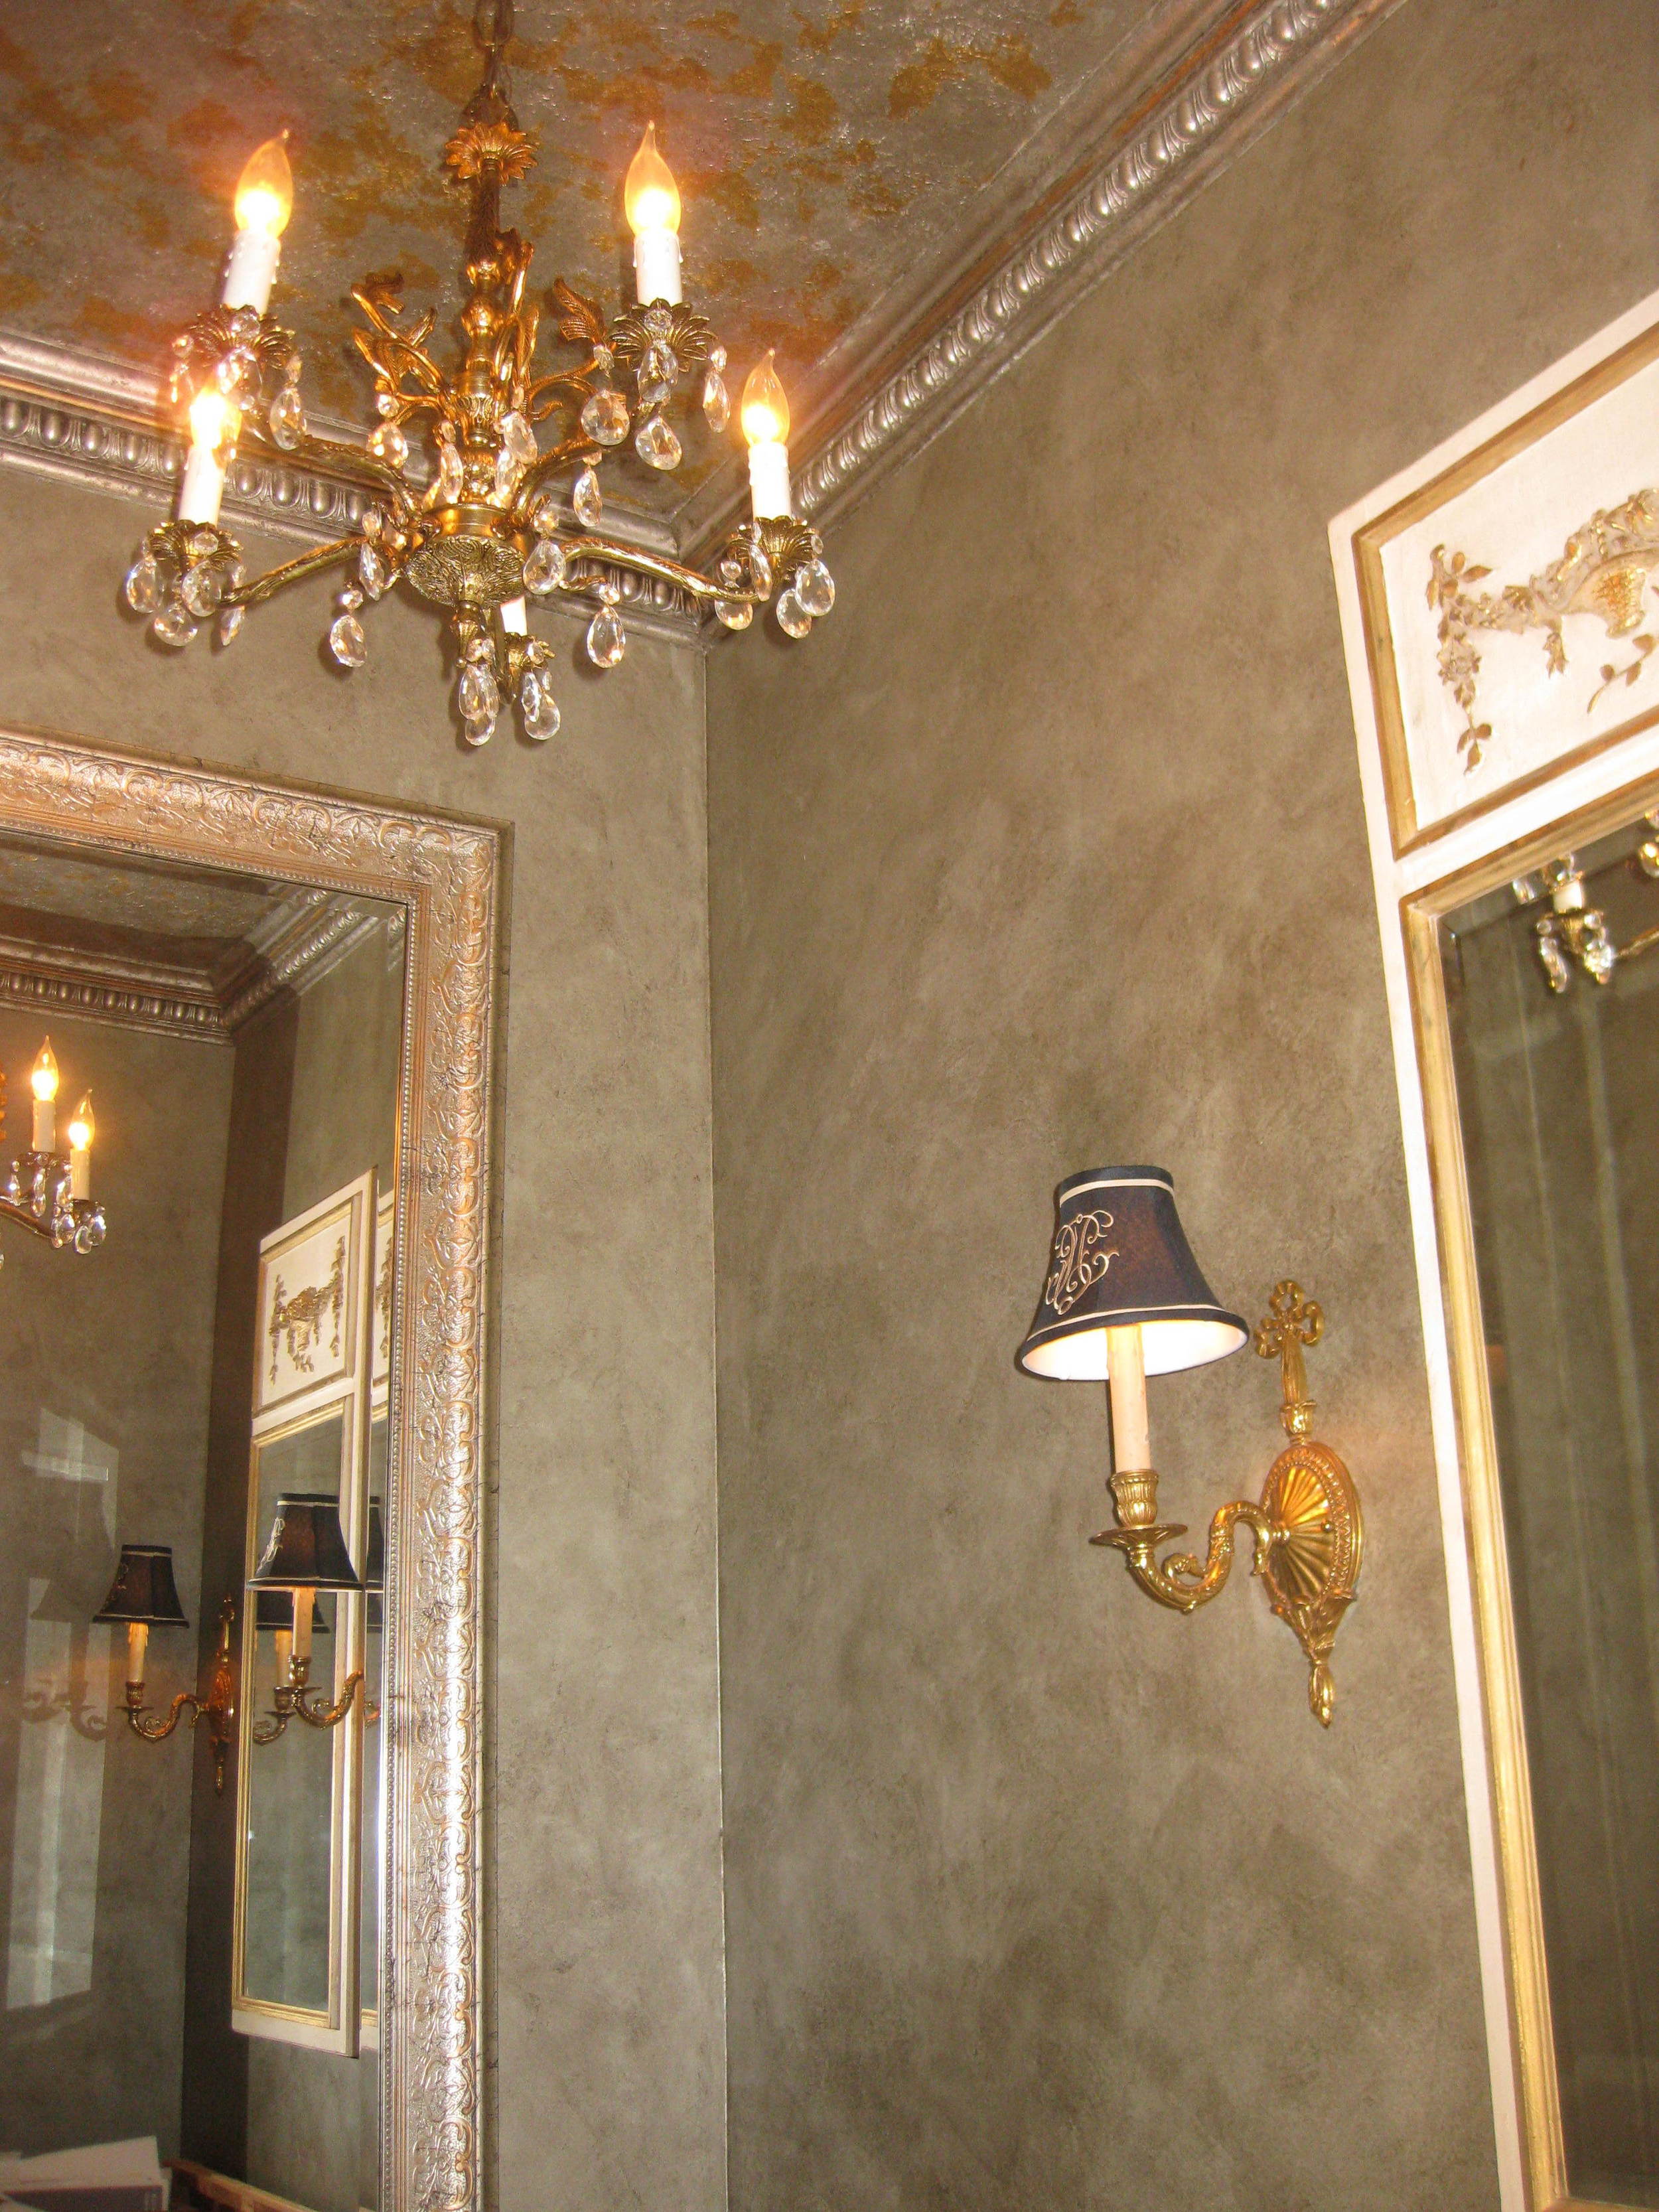 Silver Leaf Molding, Broken Gold and Silver Leaf Ceiling, Faux Walls